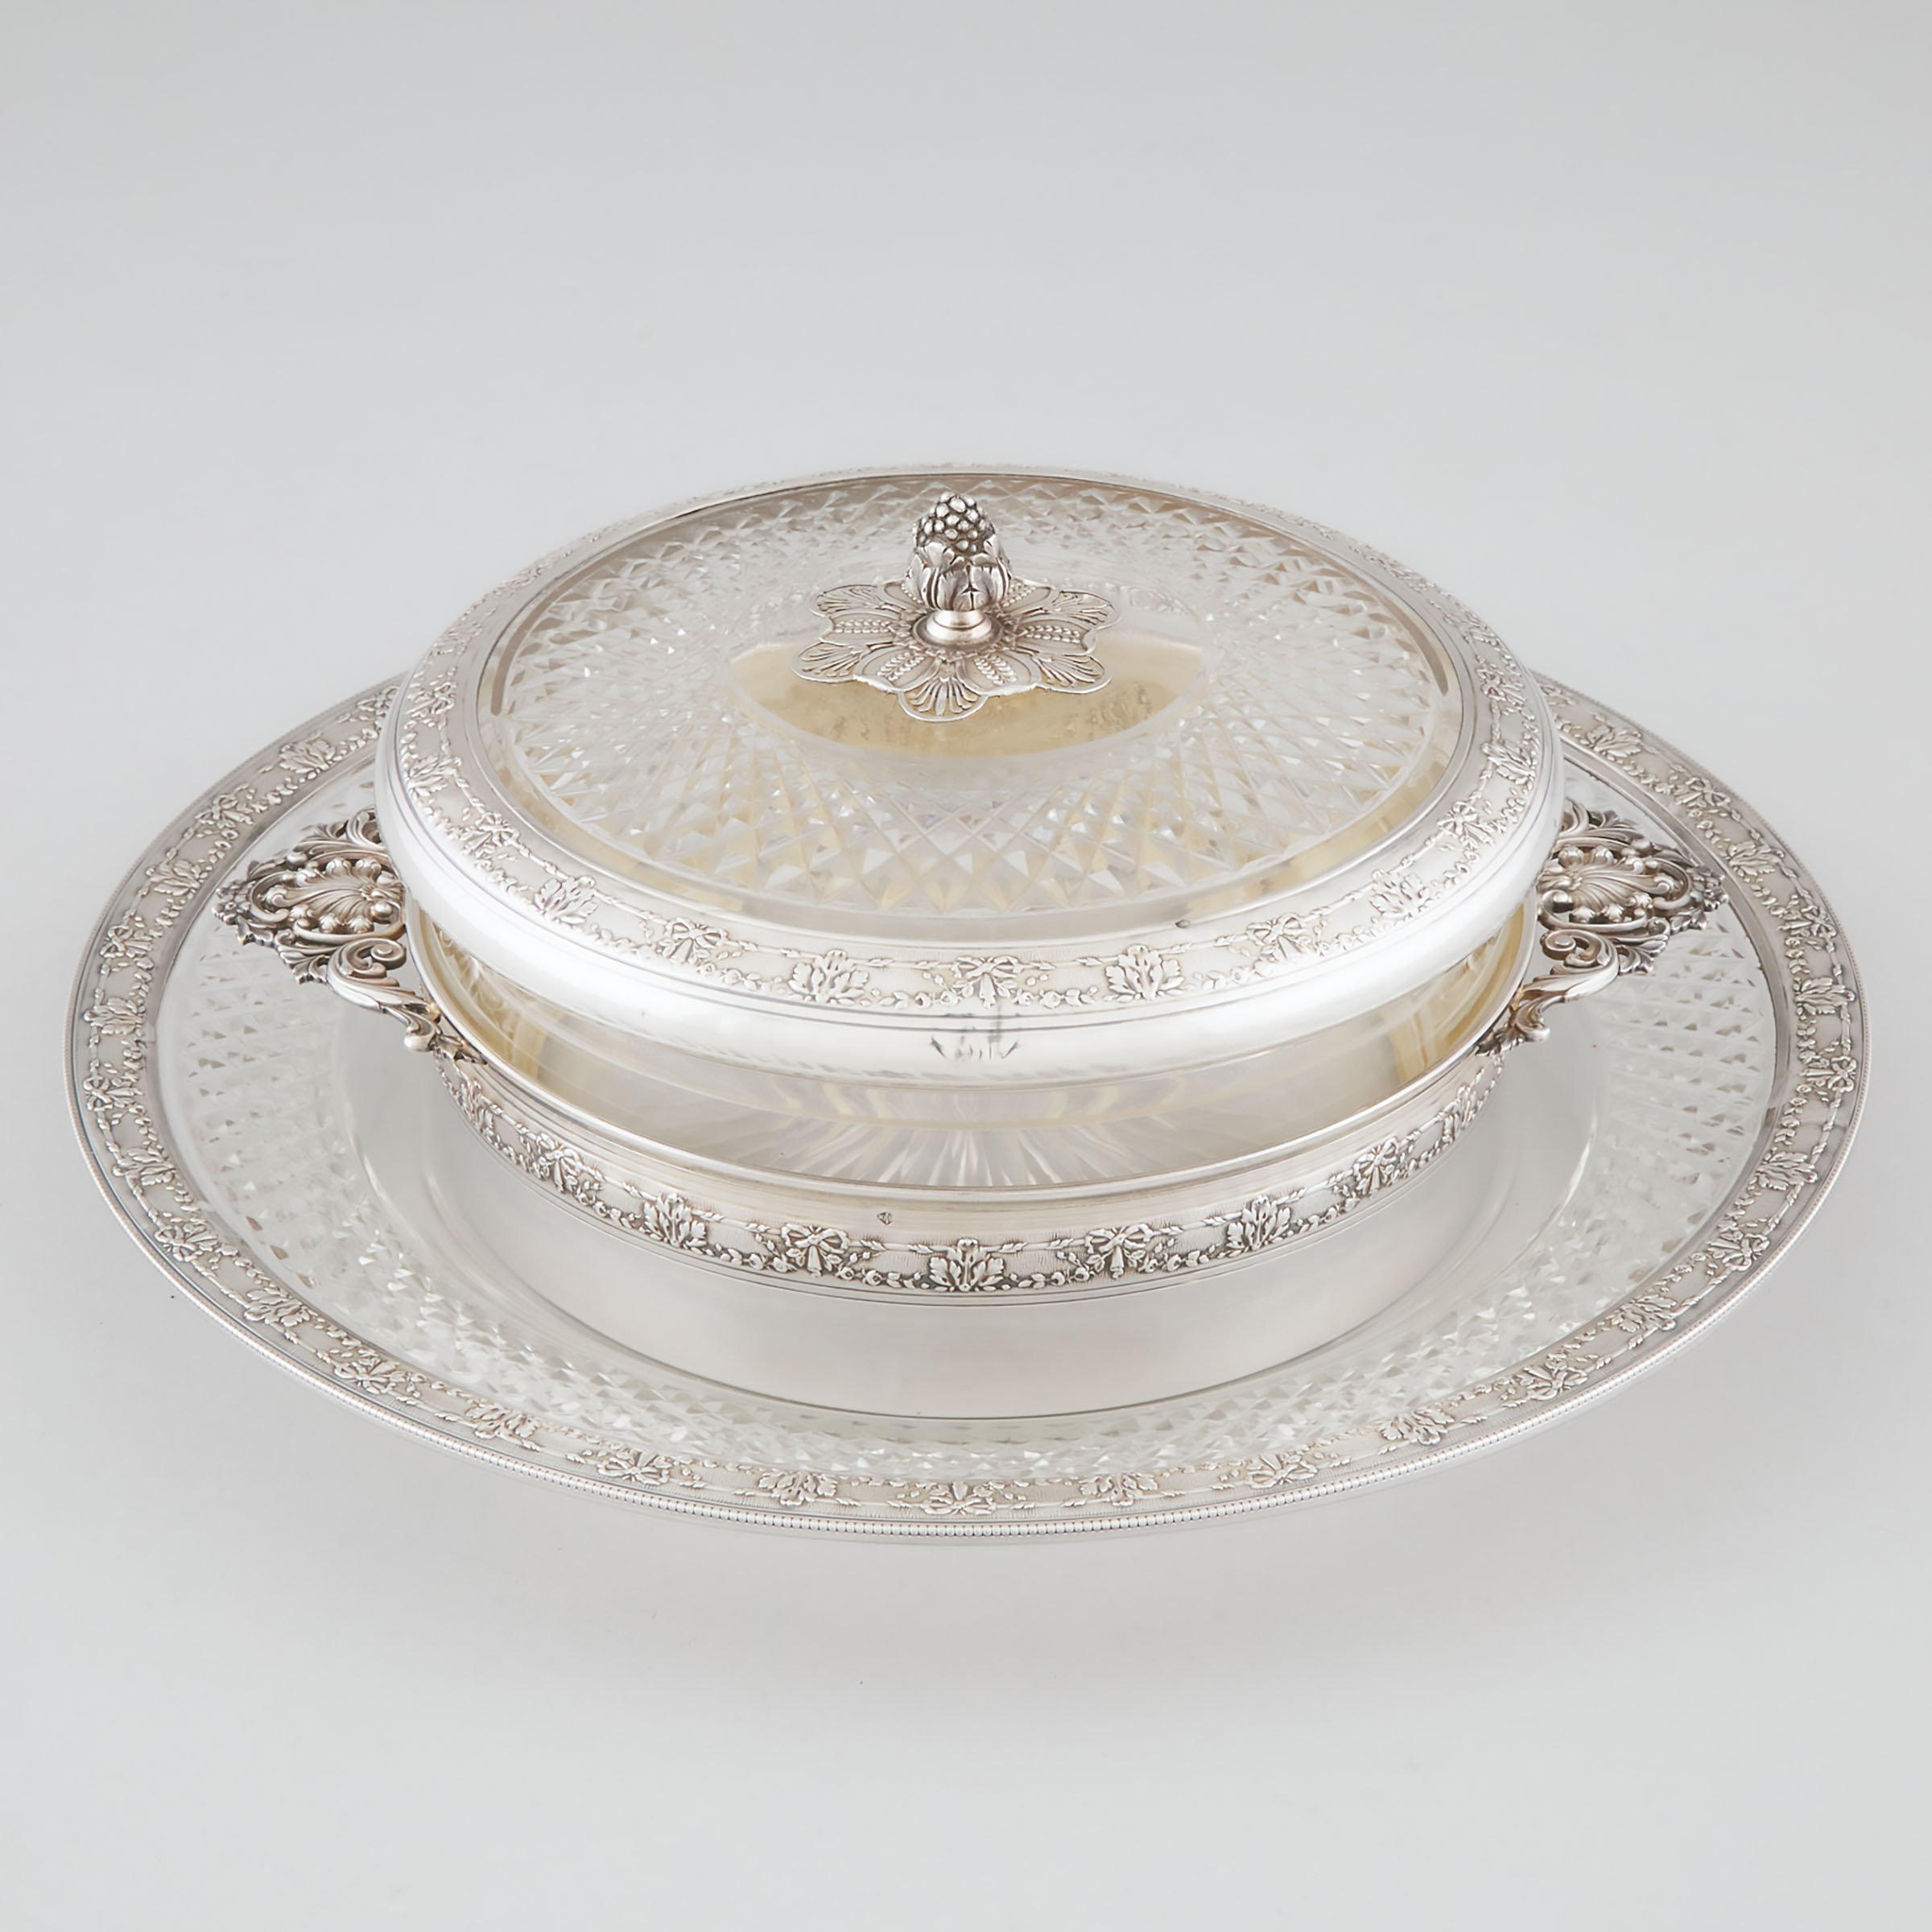 French Silver Mounted Cut Glass Two-Handled Serving Dish with Cover and Stand, Henri Lapeyre, Paris, early 20th century